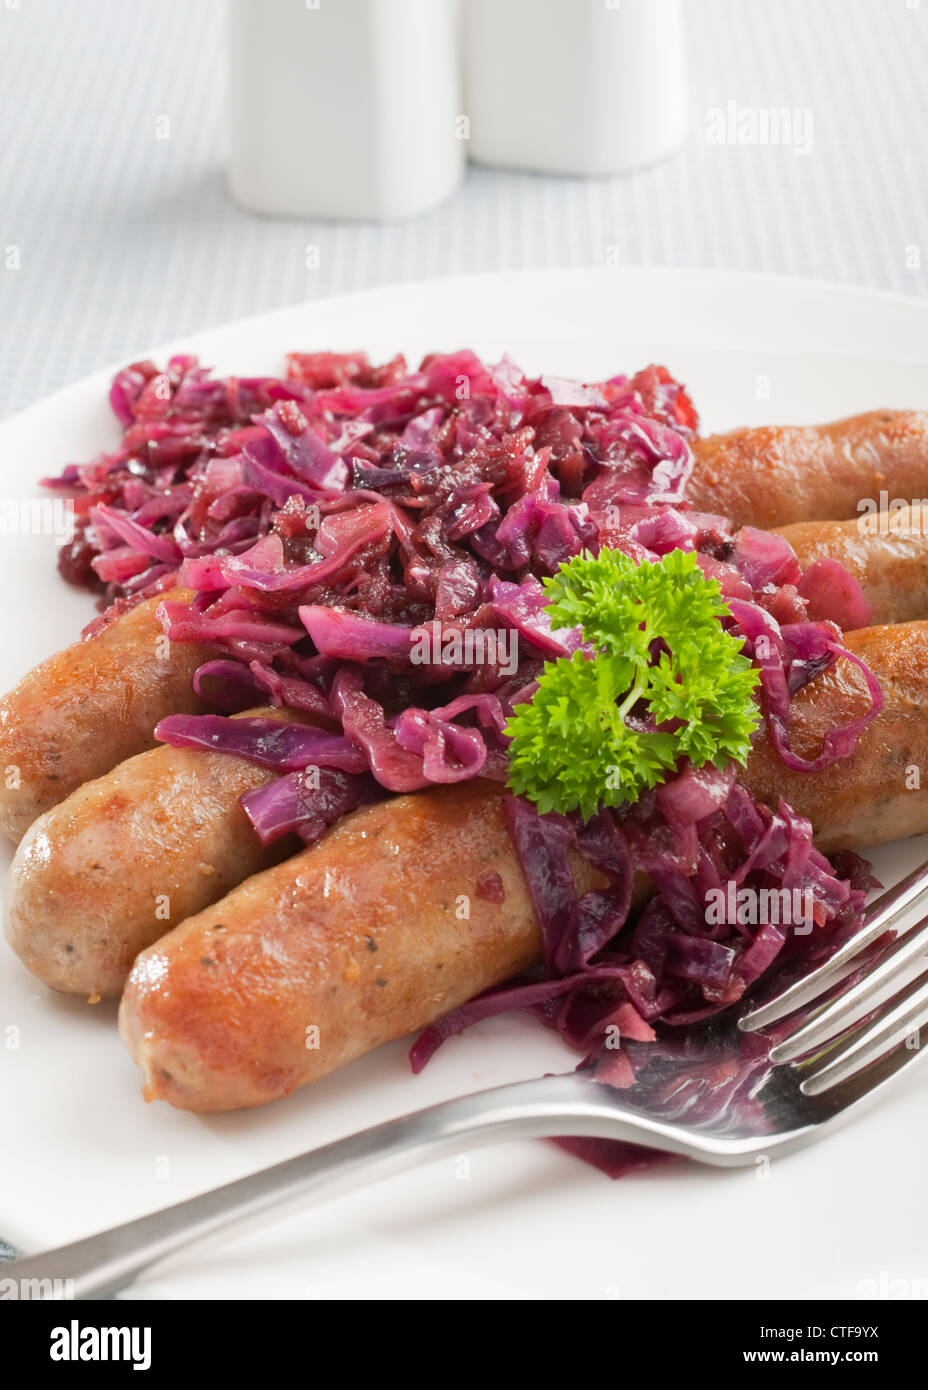 German Thuringer sausage or bratwurst, with spiced red cabbage with apple, on a plate with a fork. Stock Photo